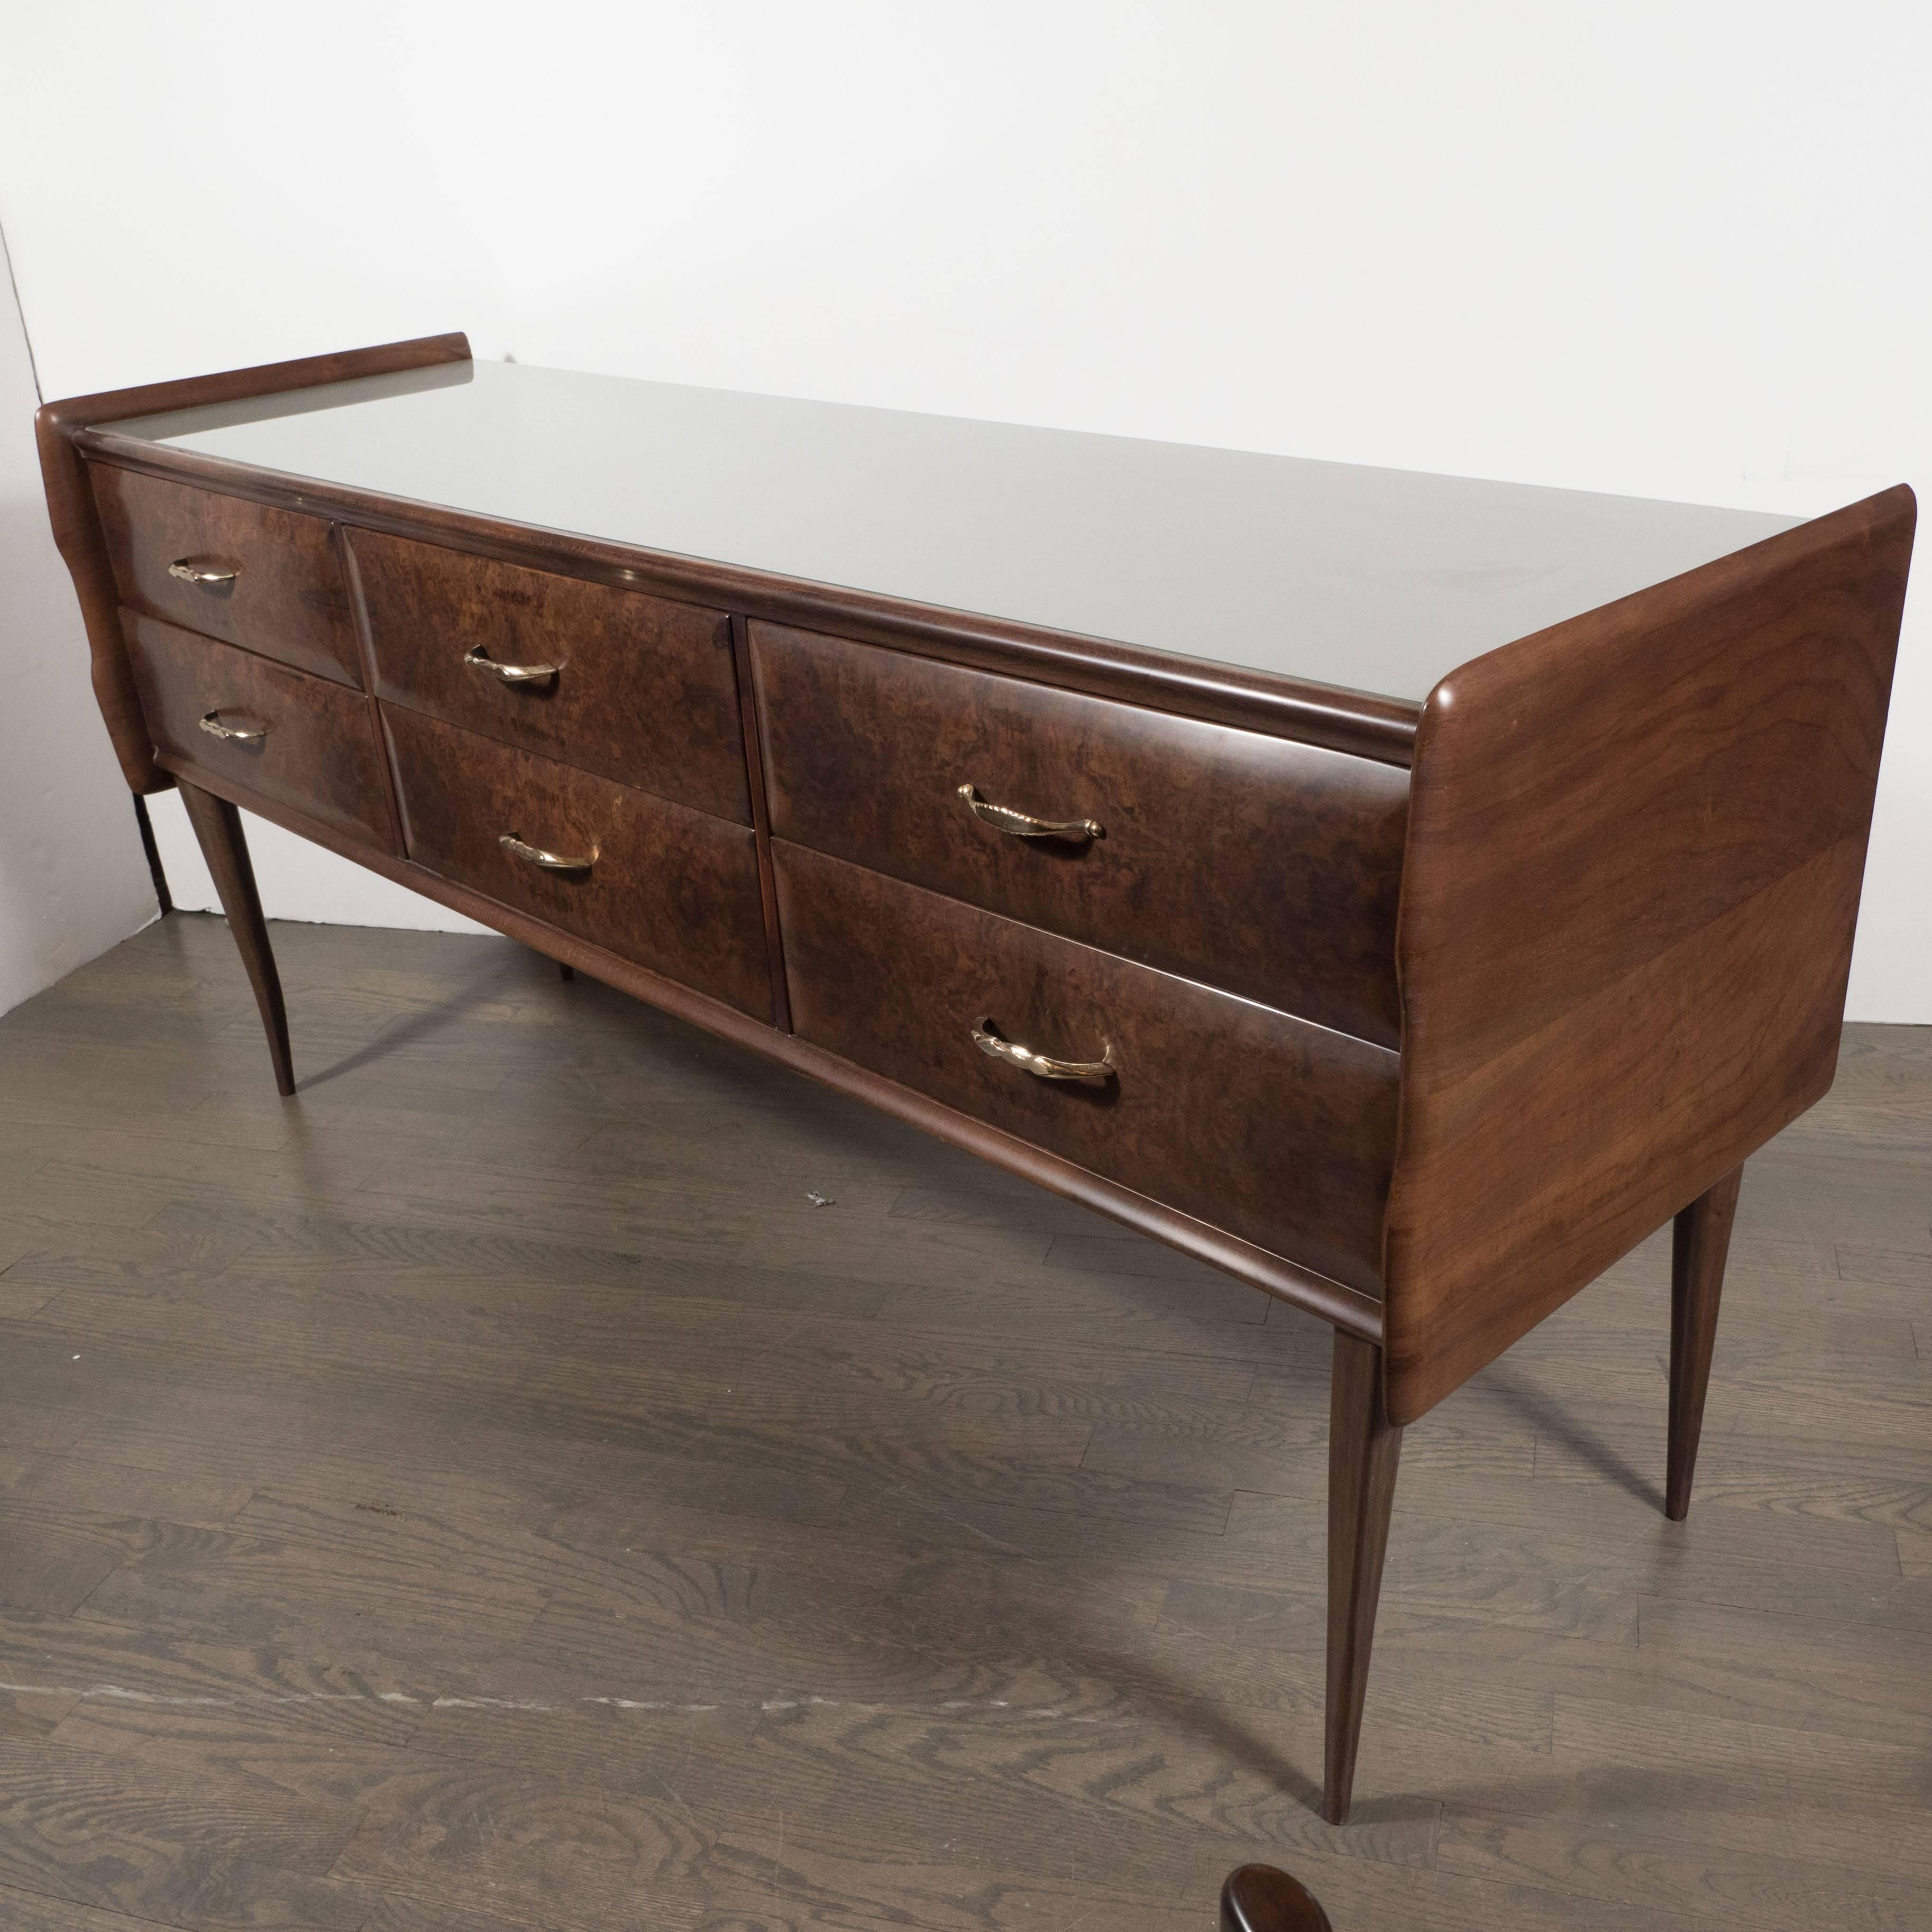 This stunning Mid-Century Modern chest was realized, in the Manner of Gio Ponti, in Italy, circa 1950. It has been handcrafted in burled and hand rubbed book matched walnut, with stylized demilune brass pulls and a black vitrolite top. No aesthetic